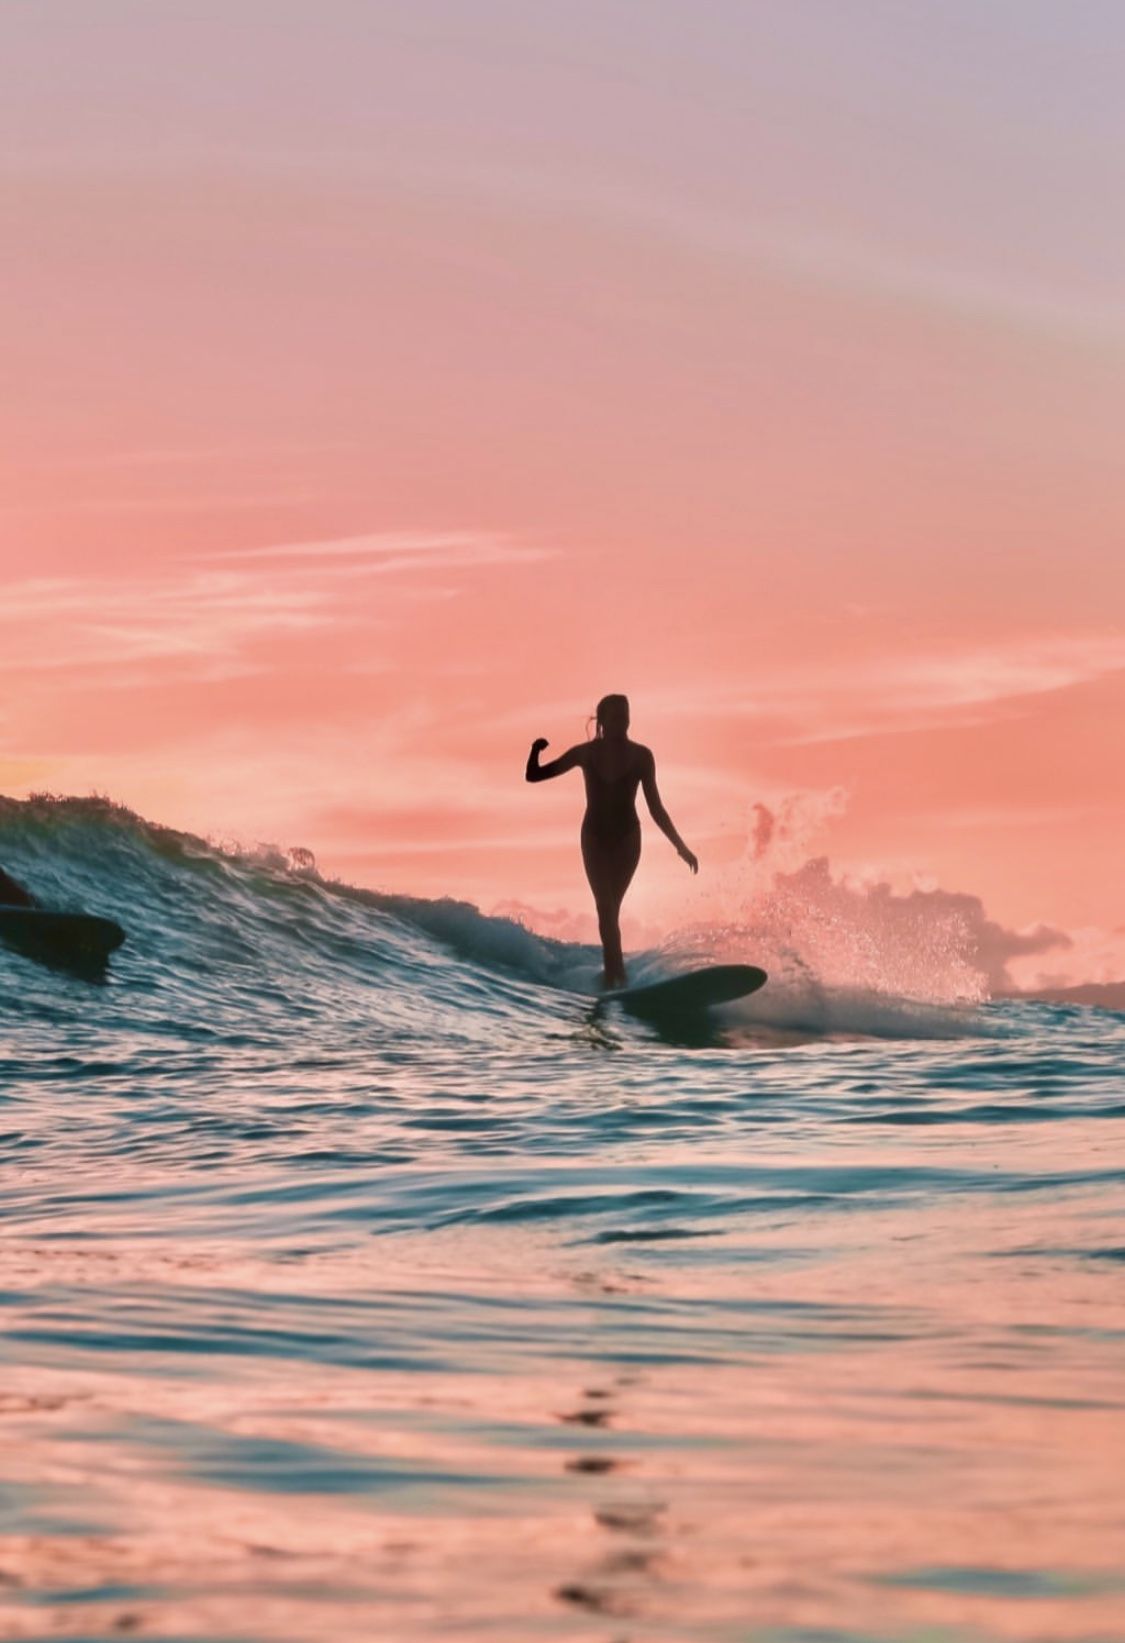 A person riding a surfboard on top of a wave. - Surf